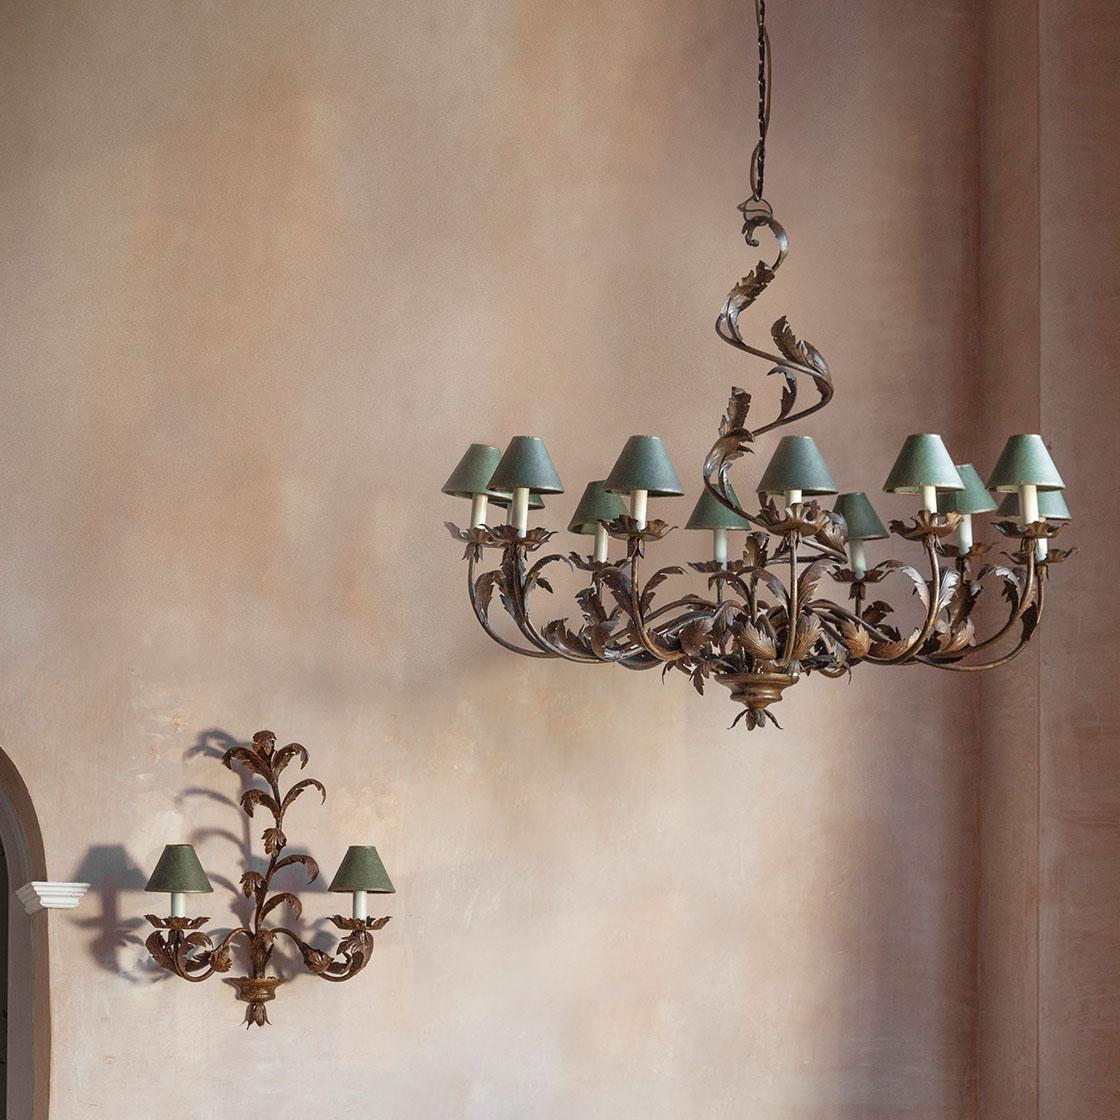 Borghese large 12 arm chandelier in Wrought iron with Spencer chair and Elvira cushion - Beaumont & Fletcher